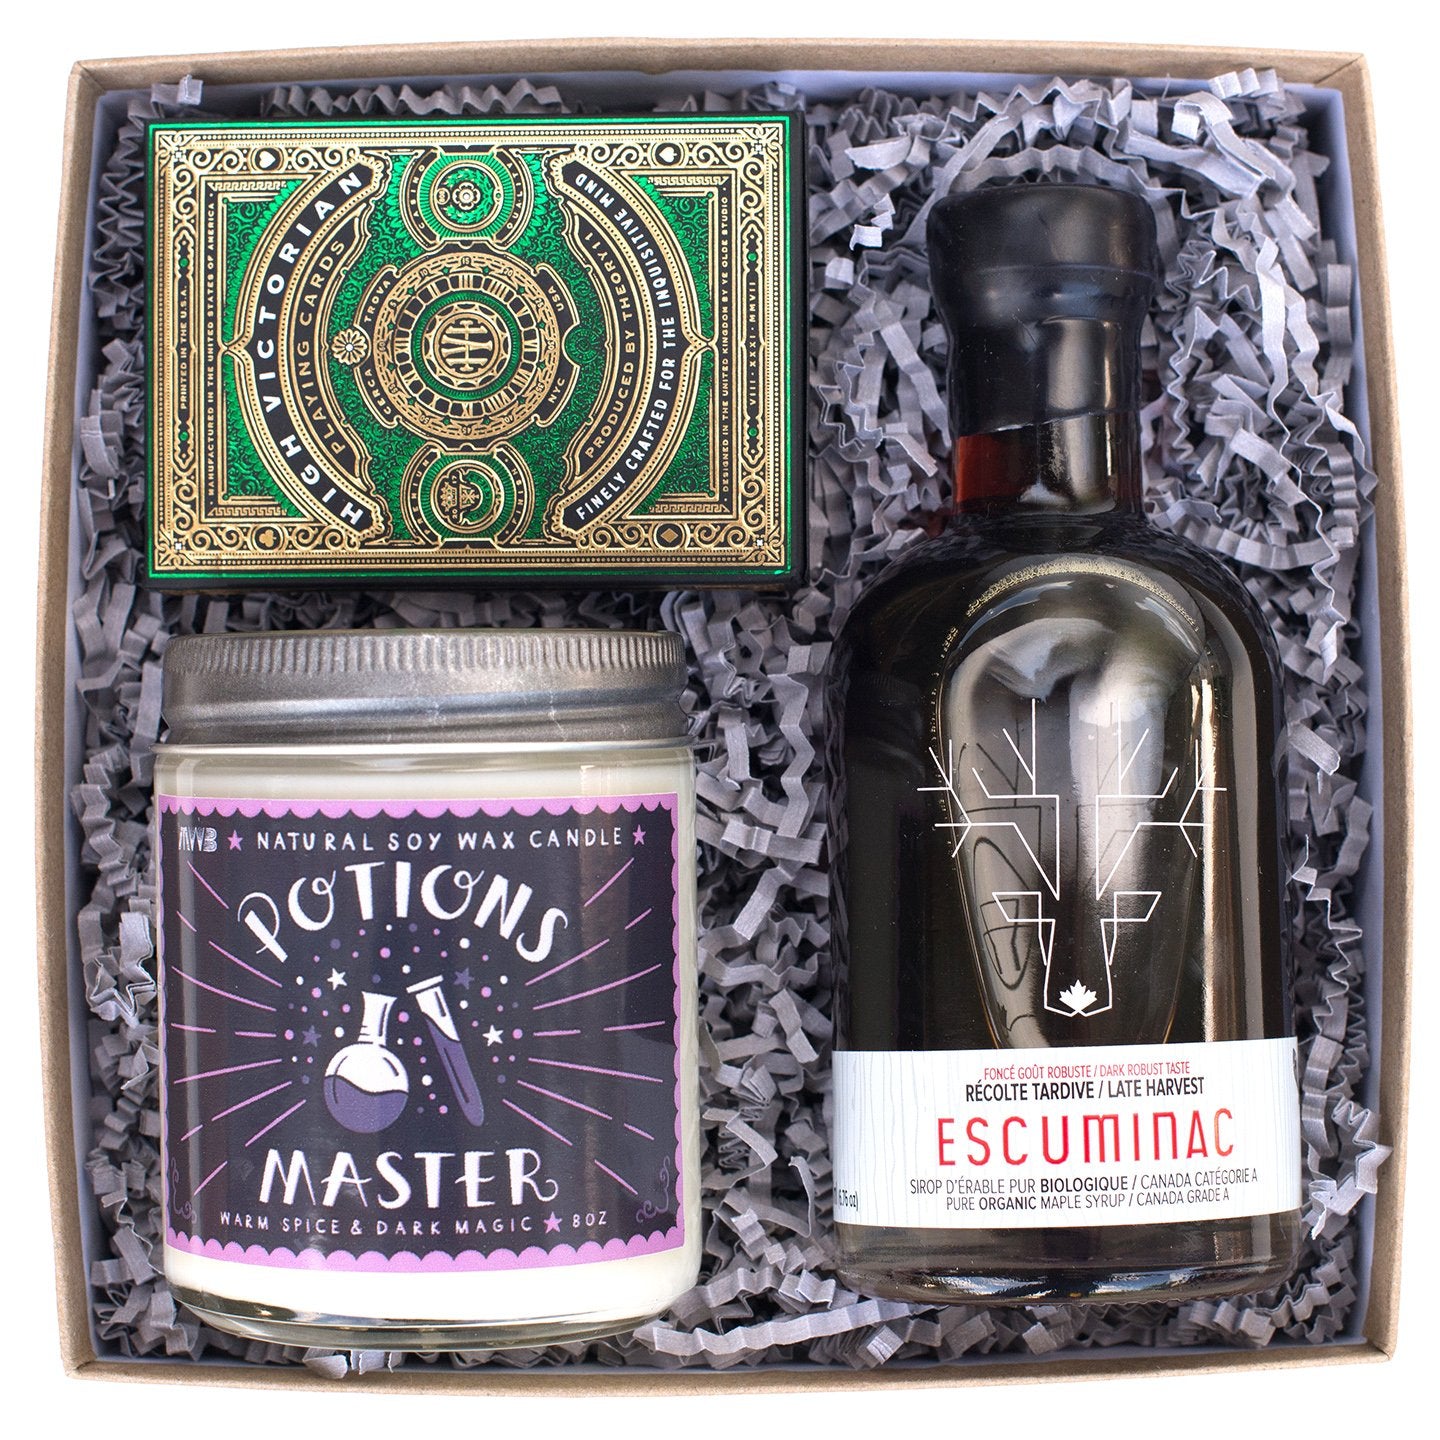 Potions master gift box my weekend is booked client gift ideas gift for drink lover 